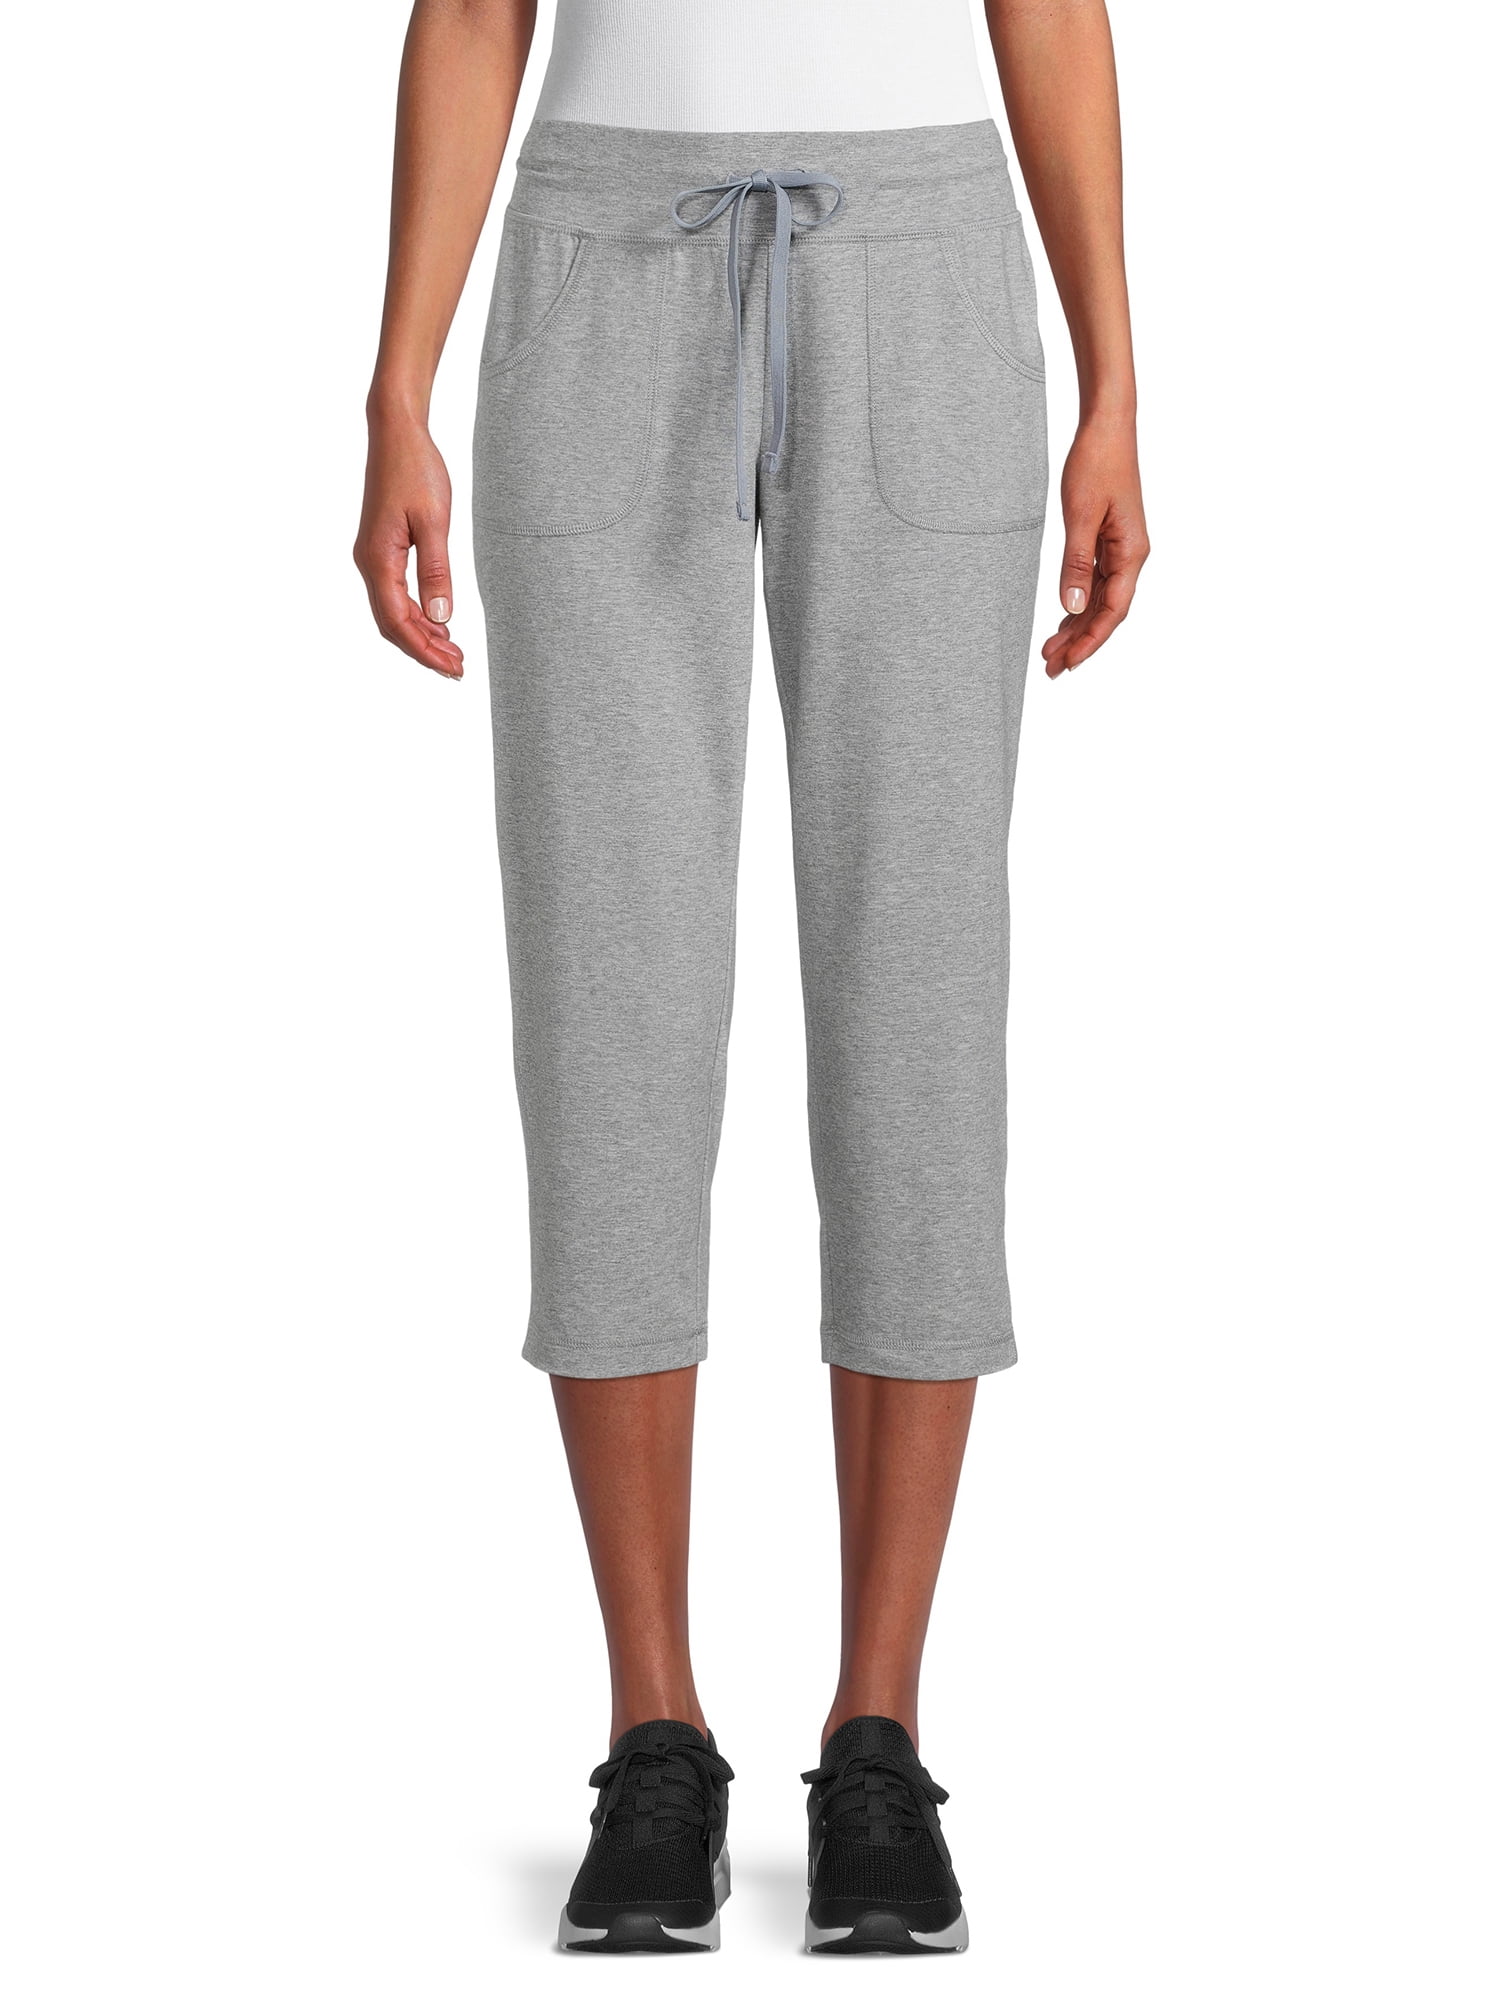 Athletic Works Women's Core Knit Capri With Front Pockets - Walmart.com